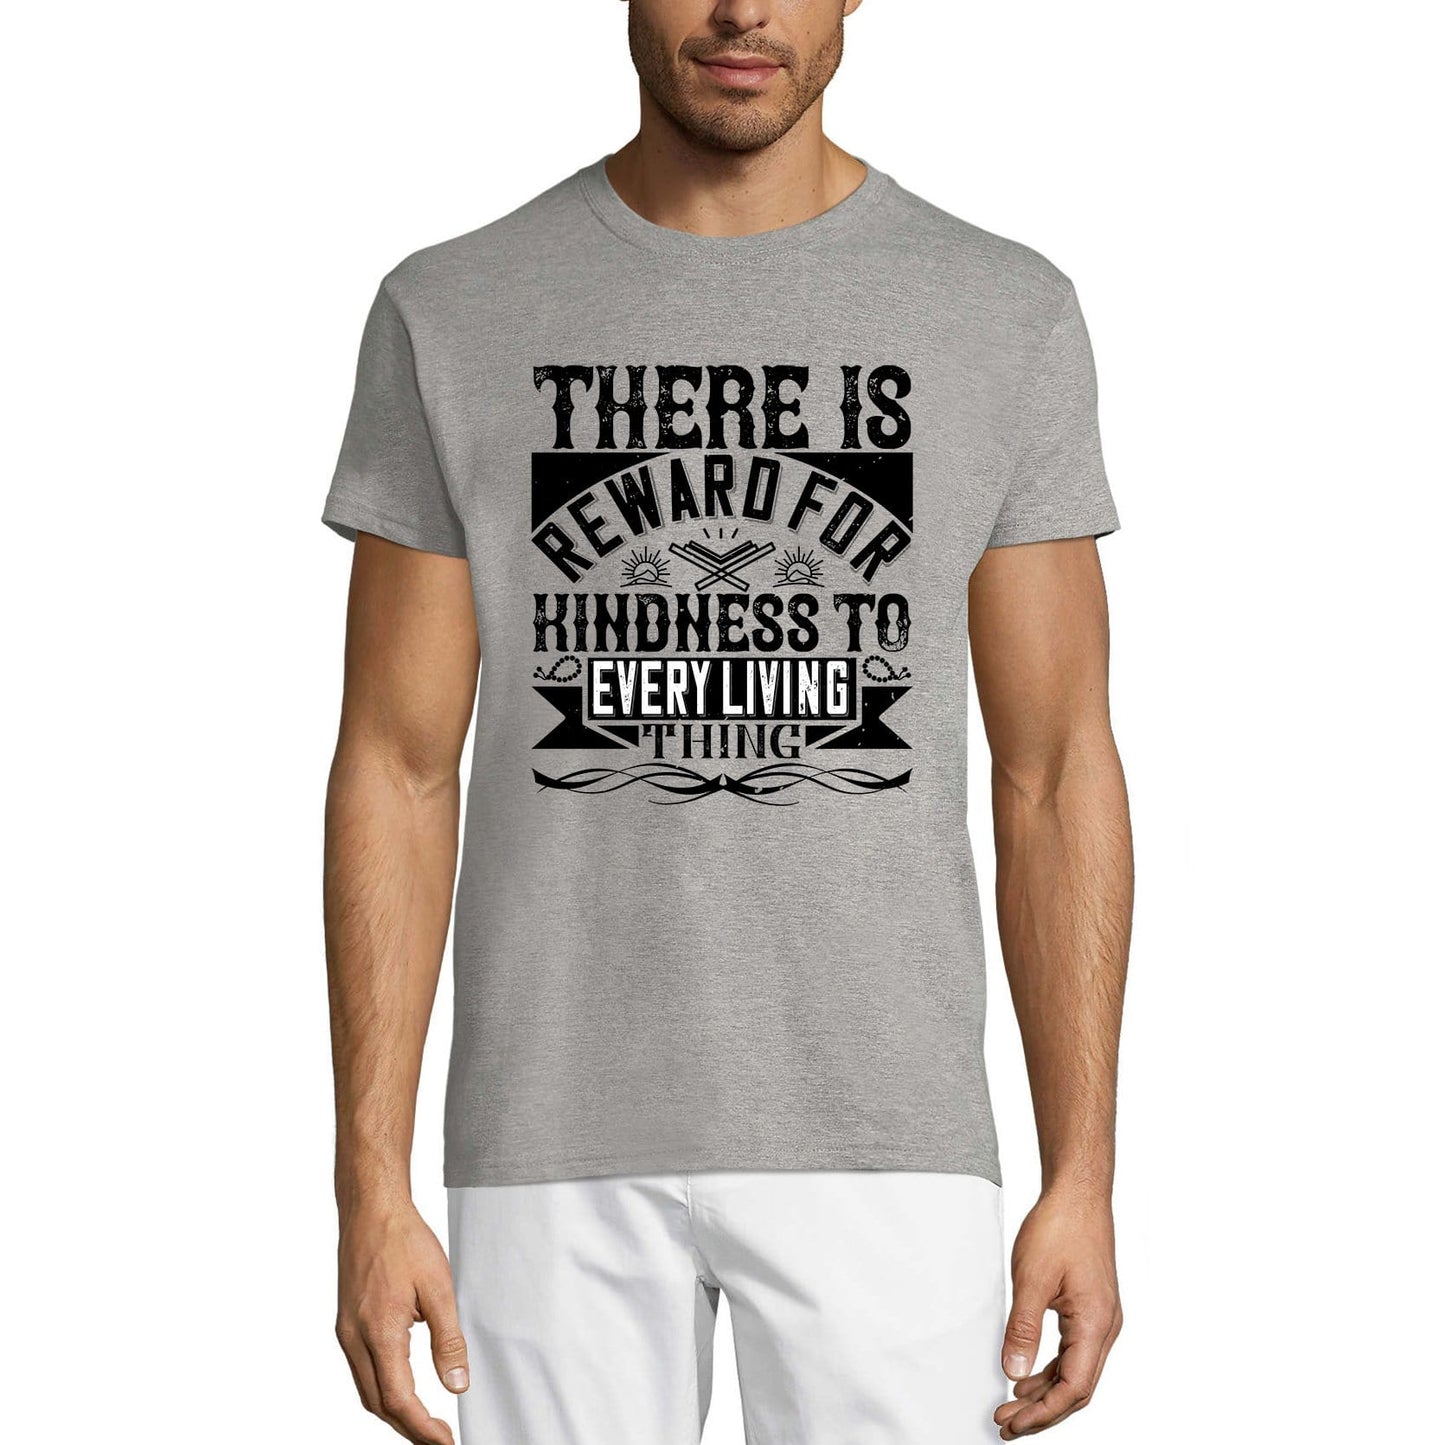 ULTRABASIC Men's T-Shirt There Is Reward For Kindness To Every Living Thing - Religious Quote